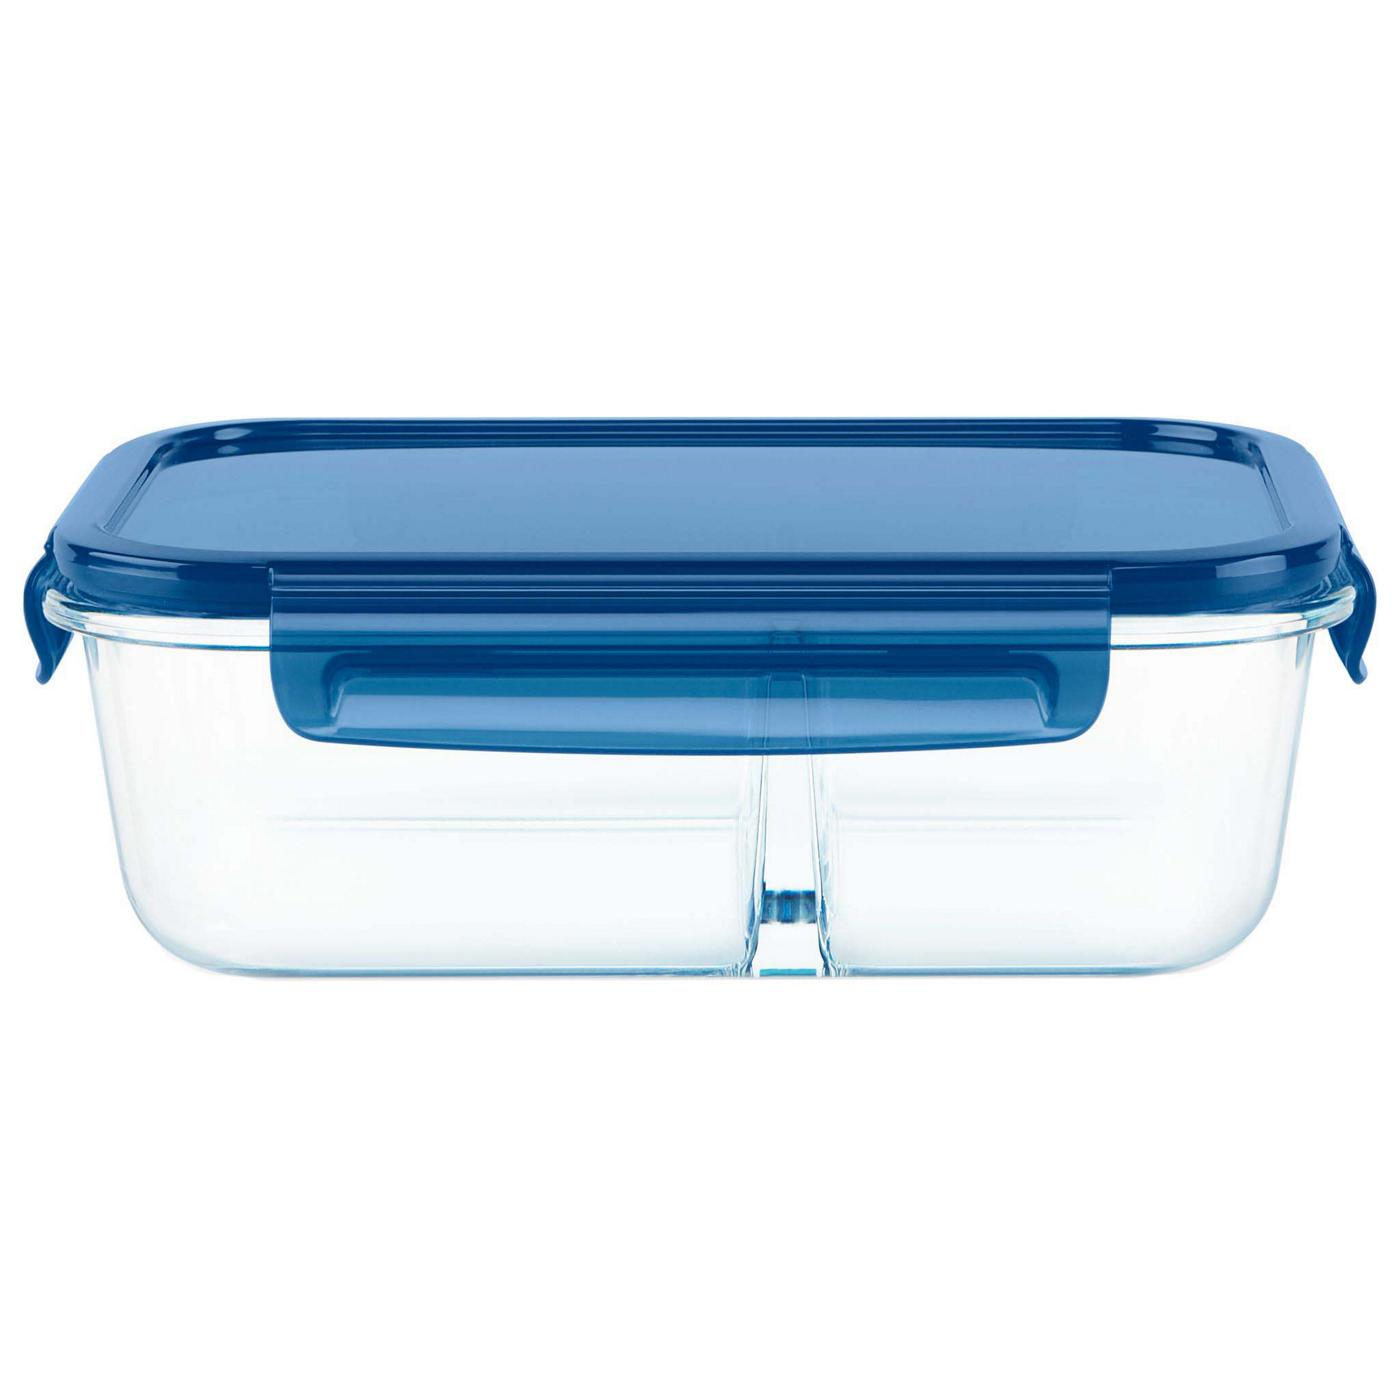 Pyrex Glass Meal Box with Plastic Cover